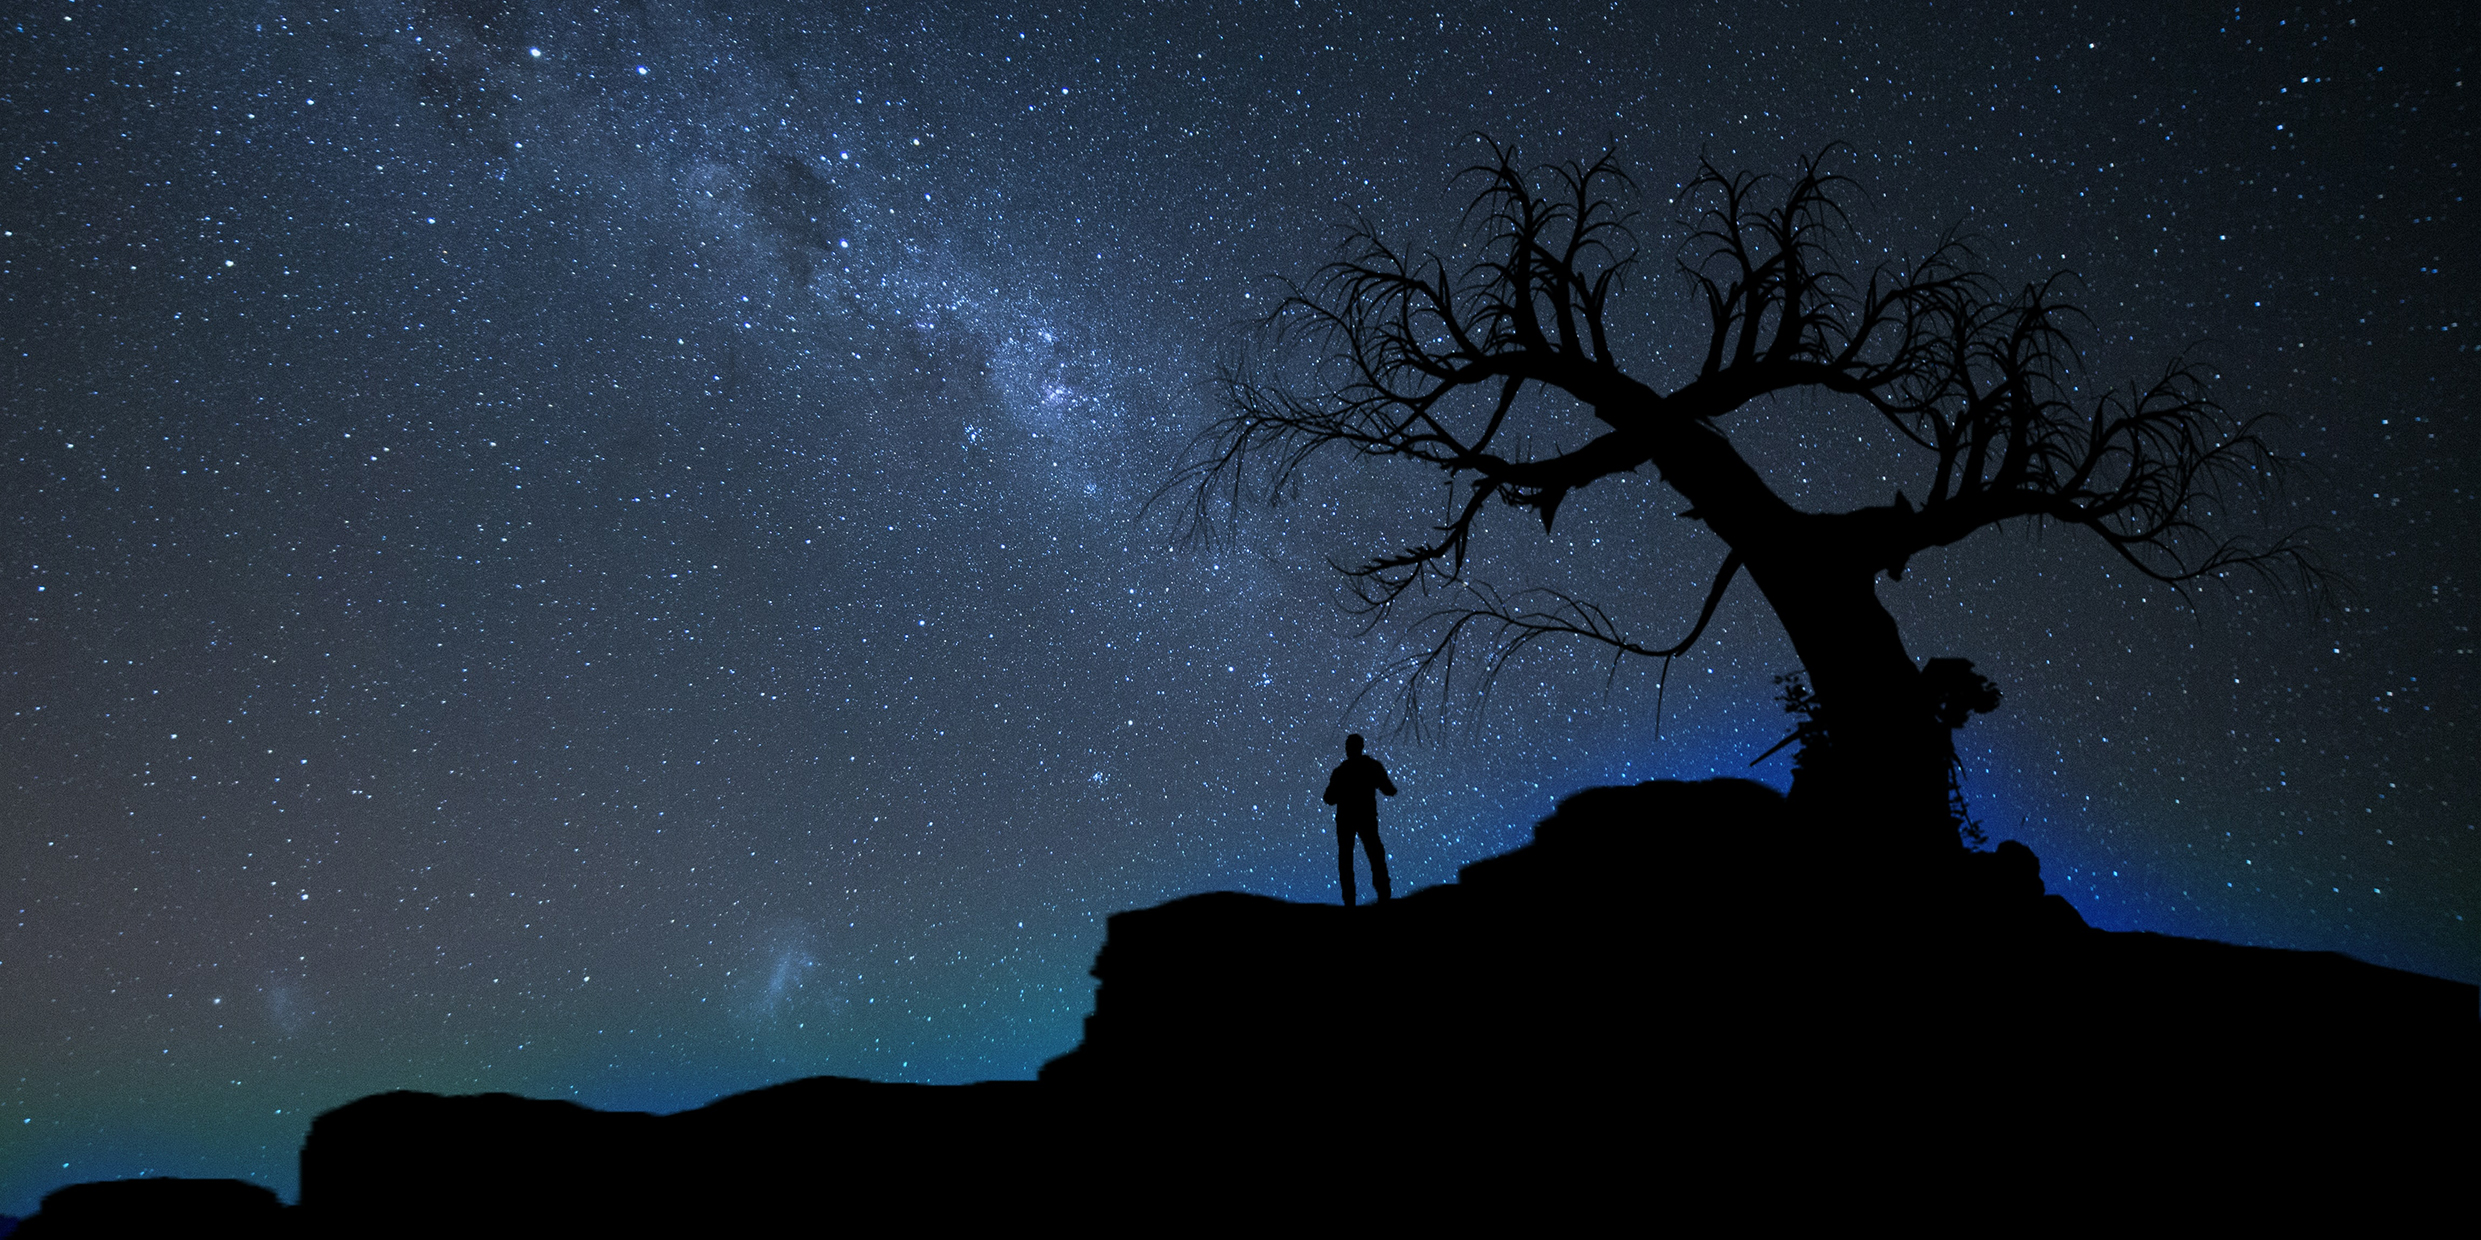 Image of man and tree silhouetted by night sky